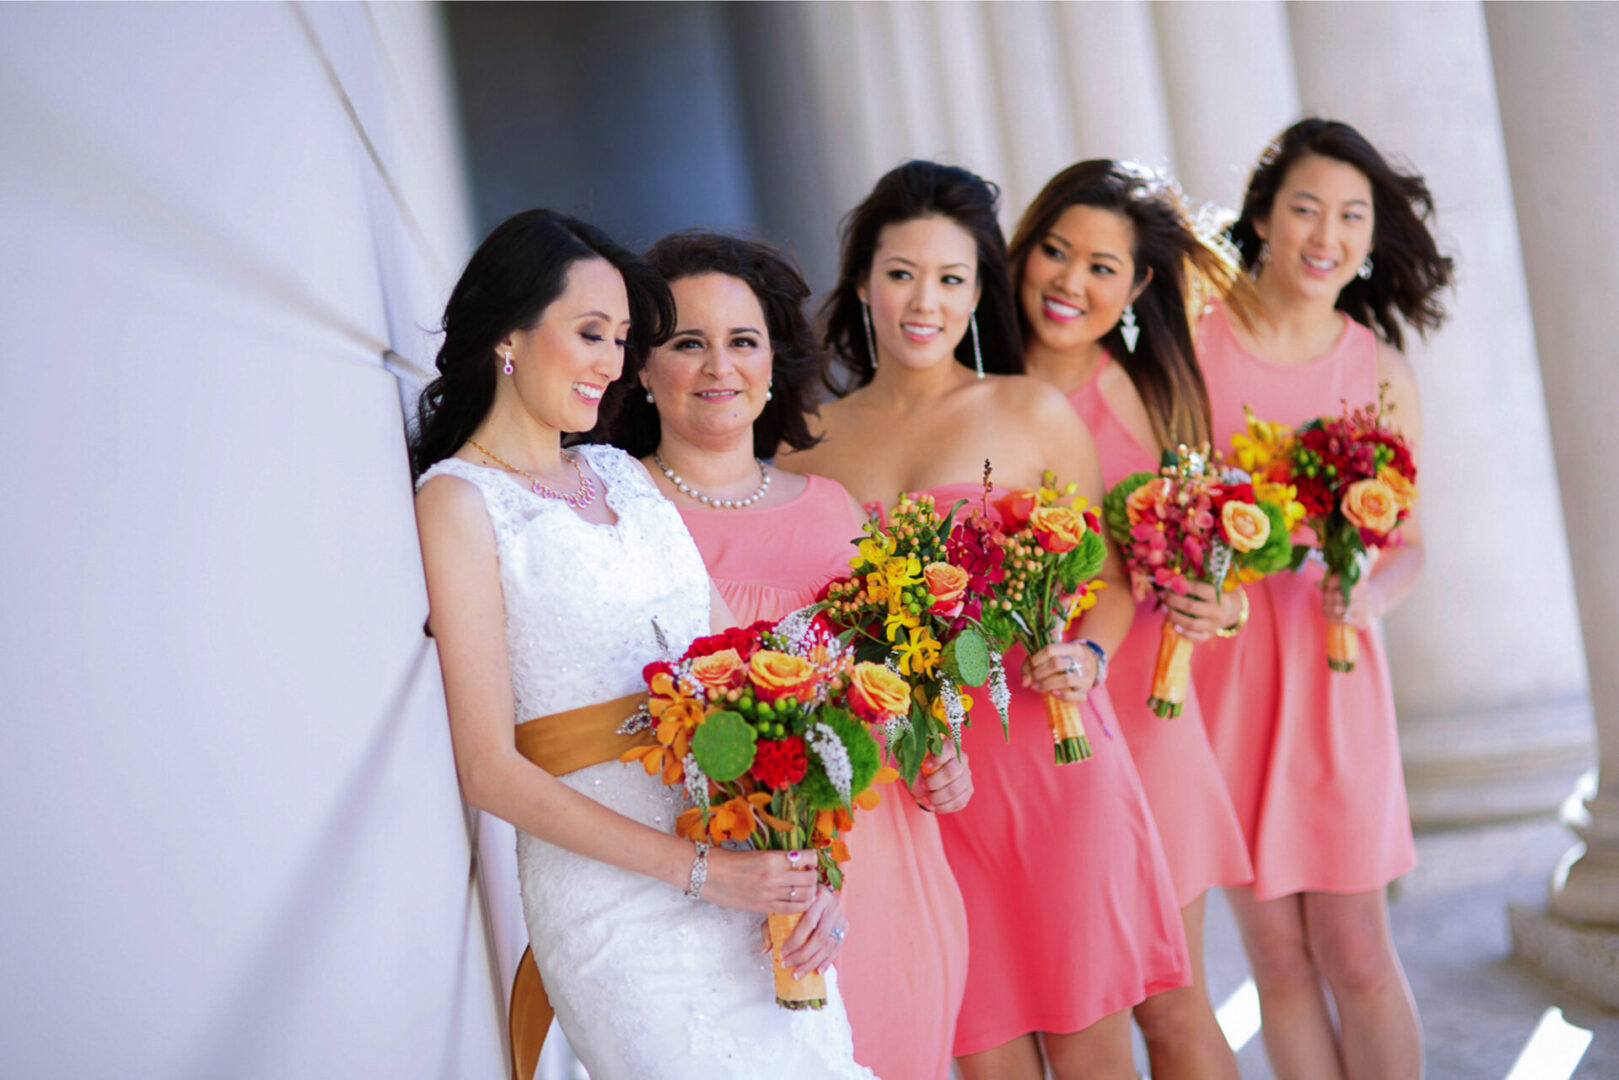 A bride in white dress standing with some other girls